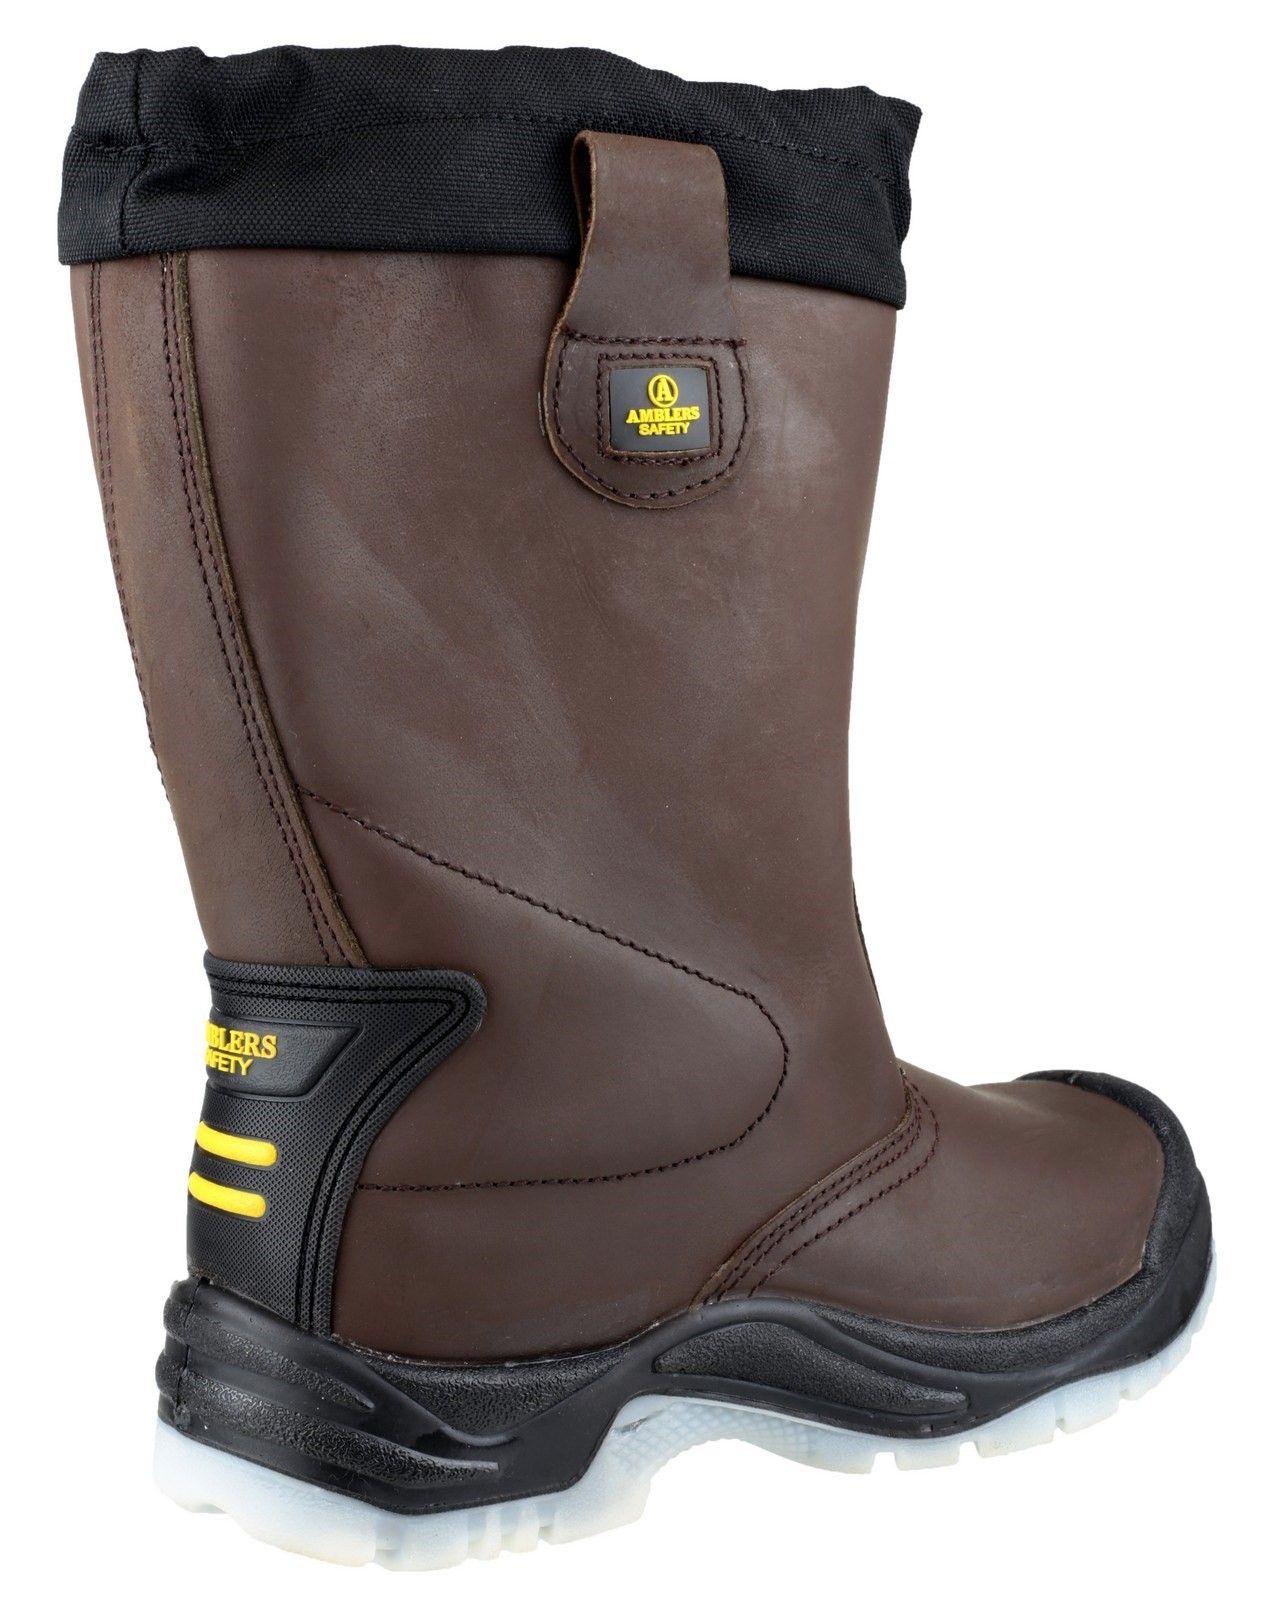 A durable leather safety rigger boot with 200J toe cap, warm lining, antistatic function and penetration protection.Amblers Safety Rigger with Toe Top. 
Conforms to EN ISO 20345:2011 Safety Footwear Standards. 
Mid Calf Water Resistant upper. 
Functional draw-cord and easily adjustable cord-lock. 
Safety boot with steel toe caps for protection.